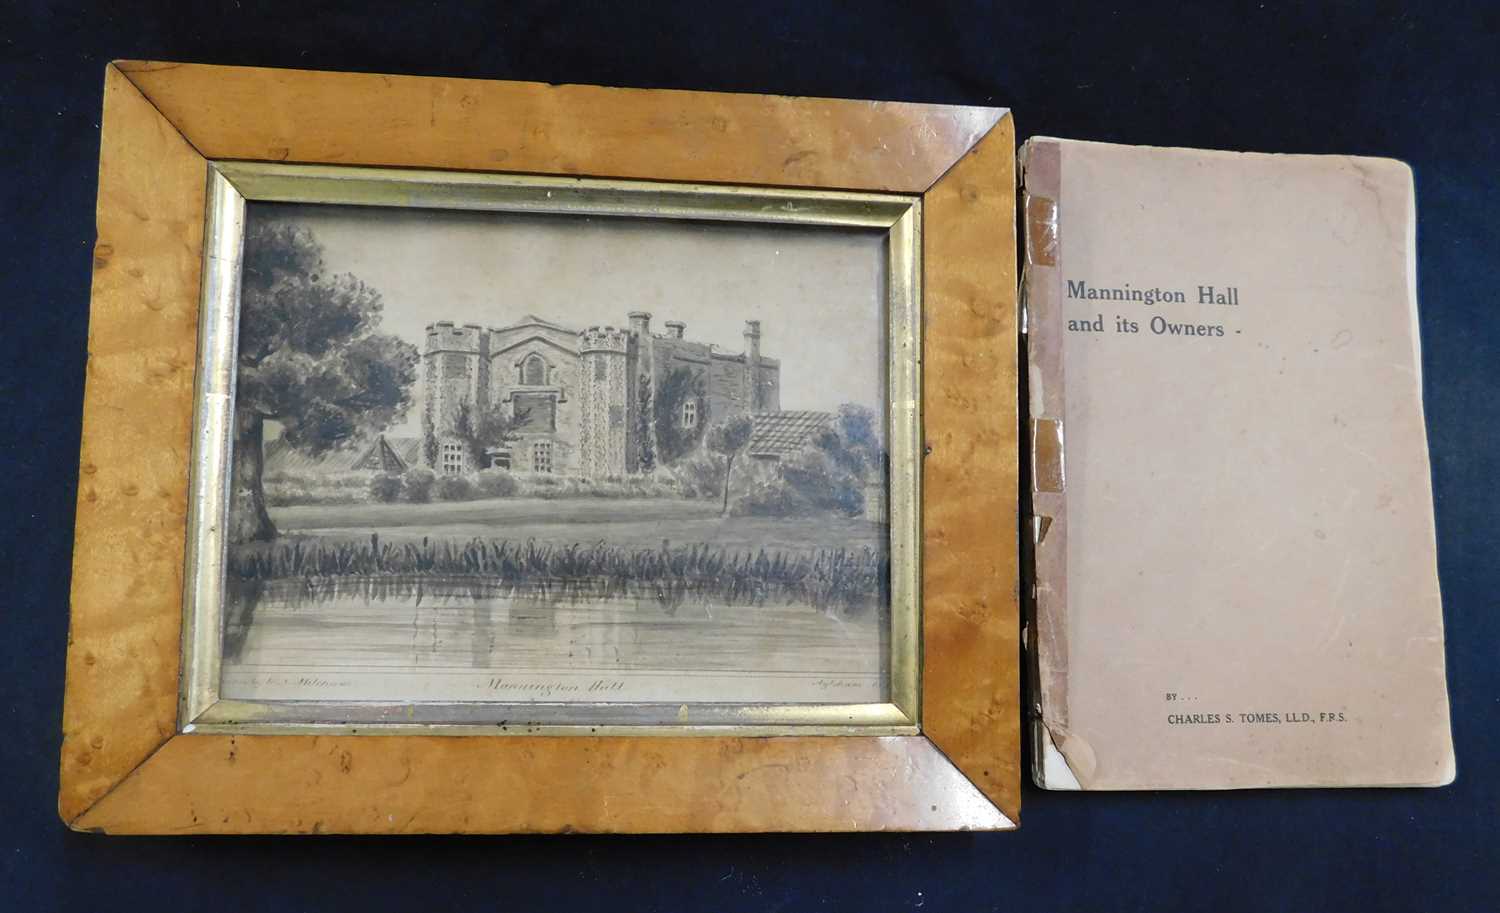 CHARLES SISSMORE TOMES: MANNINGTON HALL AND ITS OWNERS, Norwich, Goose & Son, 1916, 1st edition, 3